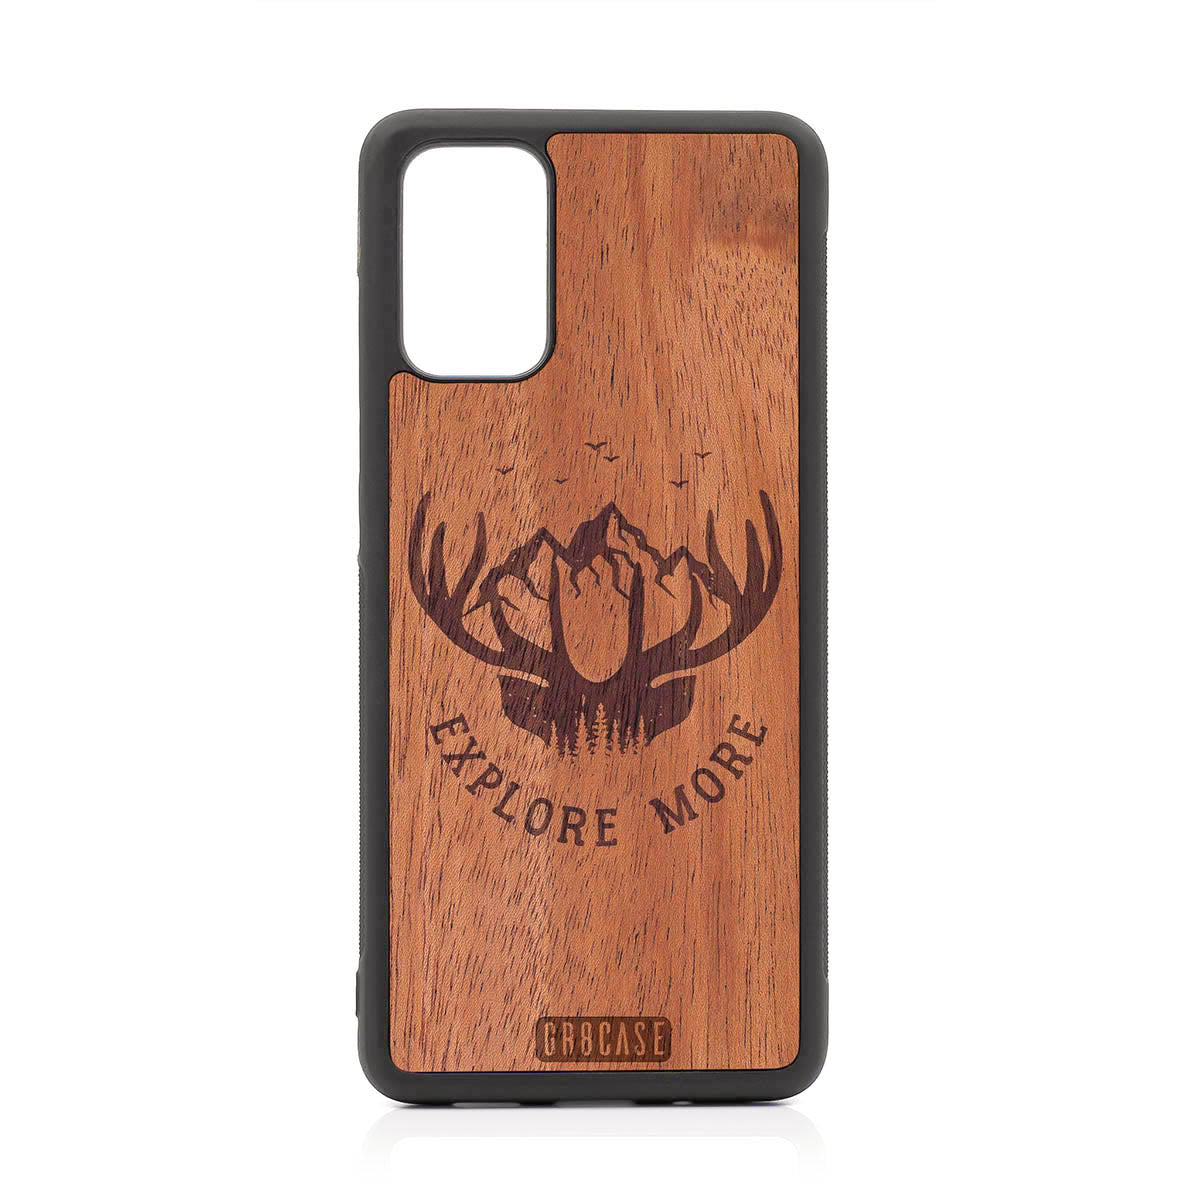 Explore More (Forest, Mountains & Antlers) Design Wood Case For Samsung Galaxy S20 Plus by GR8CASE